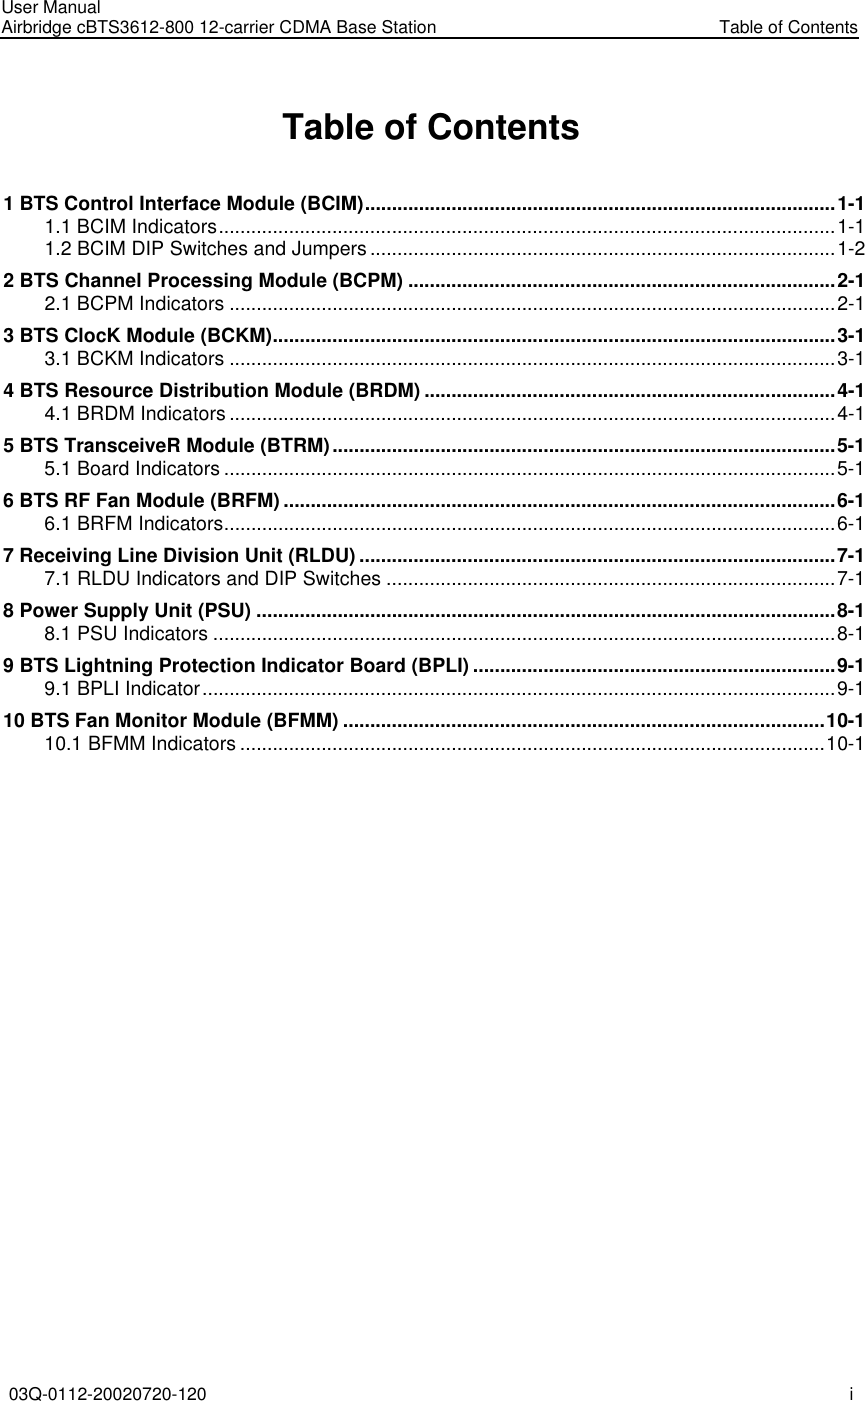 User Manual Airbridge cBTS3612-800 12-carrier CDMA Base Station   Table of Contents 03Q-0112-20020720-120 i  Table of Contents 1 BTS Control Interface Module (BCIM).......................................................................................1-1 1.1 BCIM Indicators..................................................................................................................1-1 1.2 BCIM DIP Switches and Jumpers......................................................................................1-2 2 BTS Channel Processing Module (BCPM) ...............................................................................2-1 2.1 BCPM Indicators ................................................................................................................2-1 3 BTS ClocK Module (BCKM)........................................................................................................3-1 3.1 BCKM Indicators ................................................................................................................3-1 4 BTS Resource Distribution Module (BRDM) ............................................................................4-1 4.1 BRDM Indicators................................................................................................................4-1 5 BTS TransceiveR Module (BTRM).............................................................................................5-1 5.1 Board Indicators .................................................................................................................5-1 6 BTS RF Fan Module (BRFM) ......................................................................................................6-1 6.1 BRFM Indicators.................................................................................................................6-1 7 Receiving Line Division Unit (RLDU) ........................................................................................7-1 7.1 RLDU Indicators and DIP Switches ...................................................................................7-1 8 Power Supply Unit (PSU) ...........................................................................................................8-1 8.1 PSU Indicators ...................................................................................................................8-1 9 BTS Lightning Protection Indicator Board (BPLI) ...................................................................9-1 9.1 BPLI Indicator.....................................................................................................................9-1 10 BTS Fan Monitor Module (BFMM) .........................................................................................10-1 10.1 BFMM Indicators ............................................................................................................10-1   